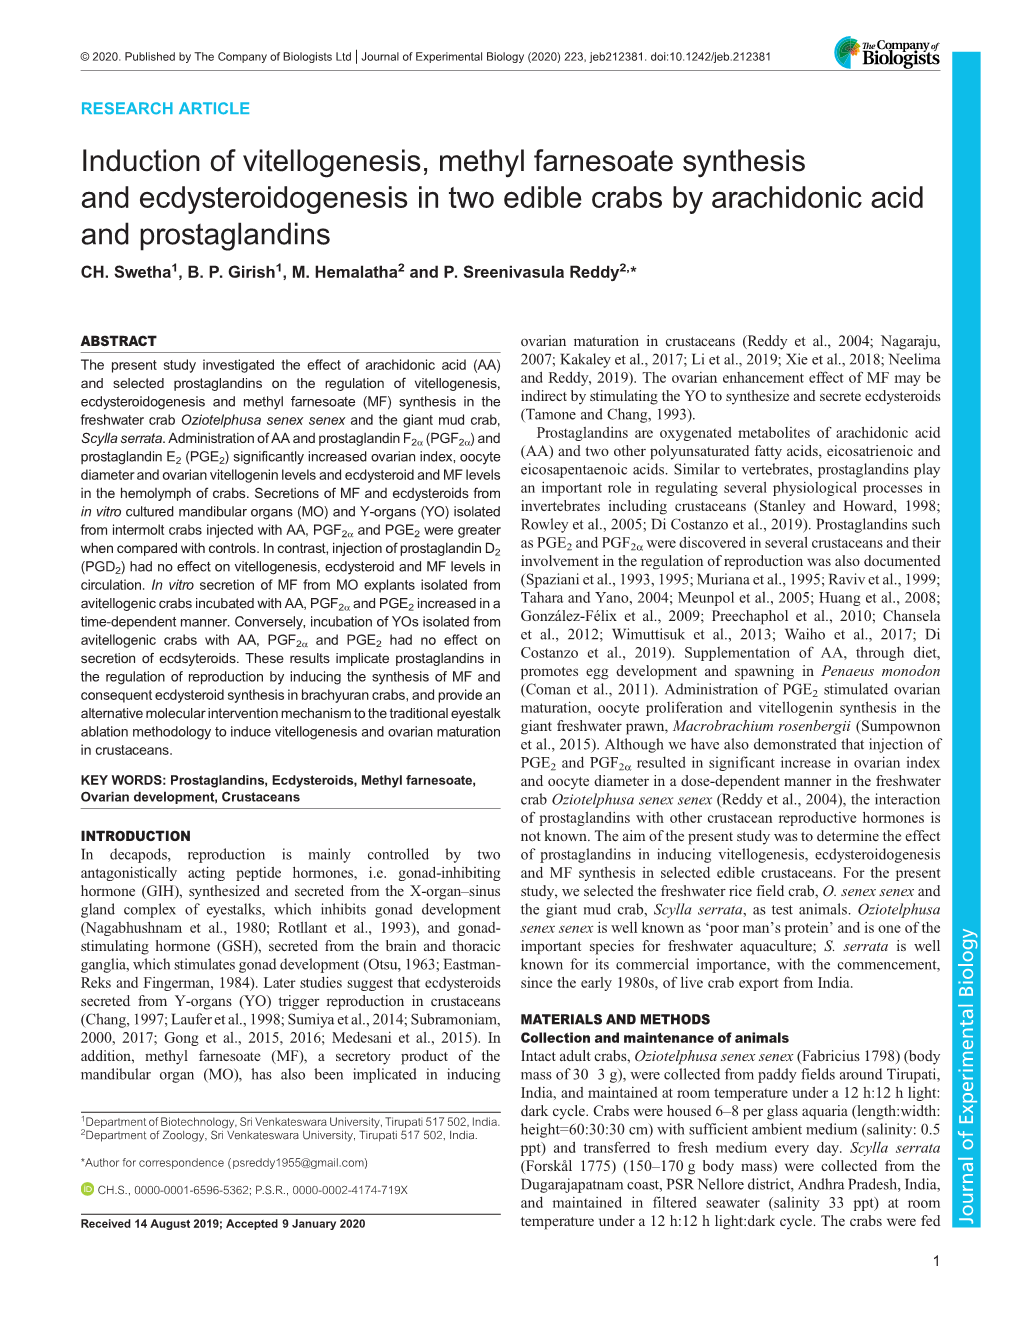 Induction of Vitellogenesis, Methyl Farnesoate Synthesis and Ecdysteroidogenesis in Two Edible Crabs by Arachidonic Acid and Prostaglandins CH